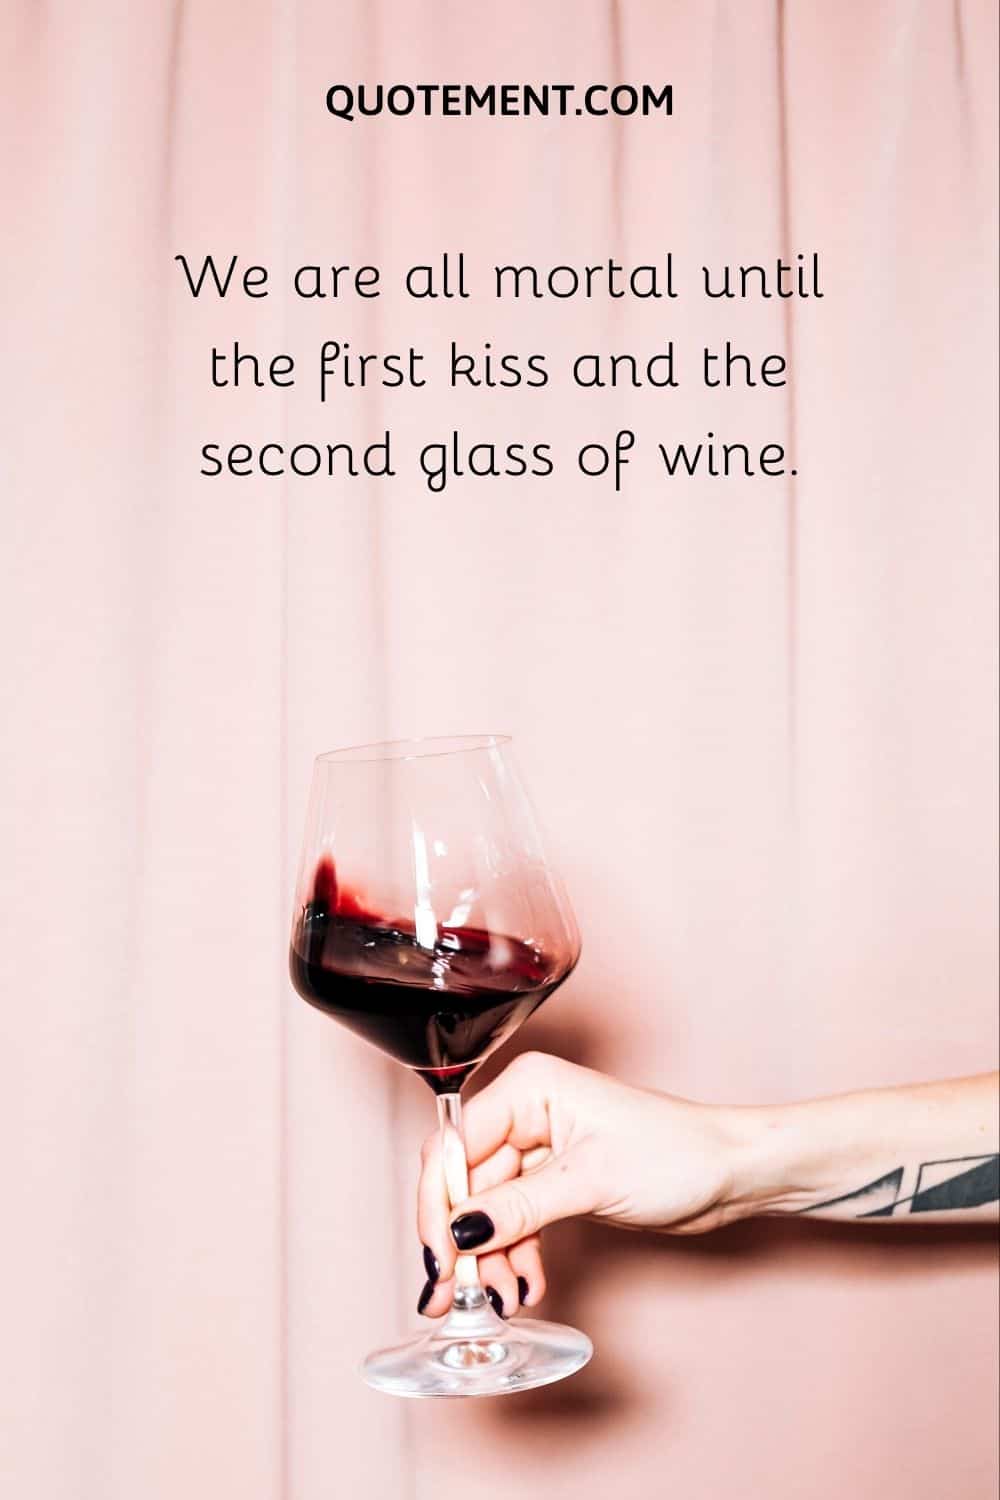 We are all mortal until the first kiss and the second glass of wine